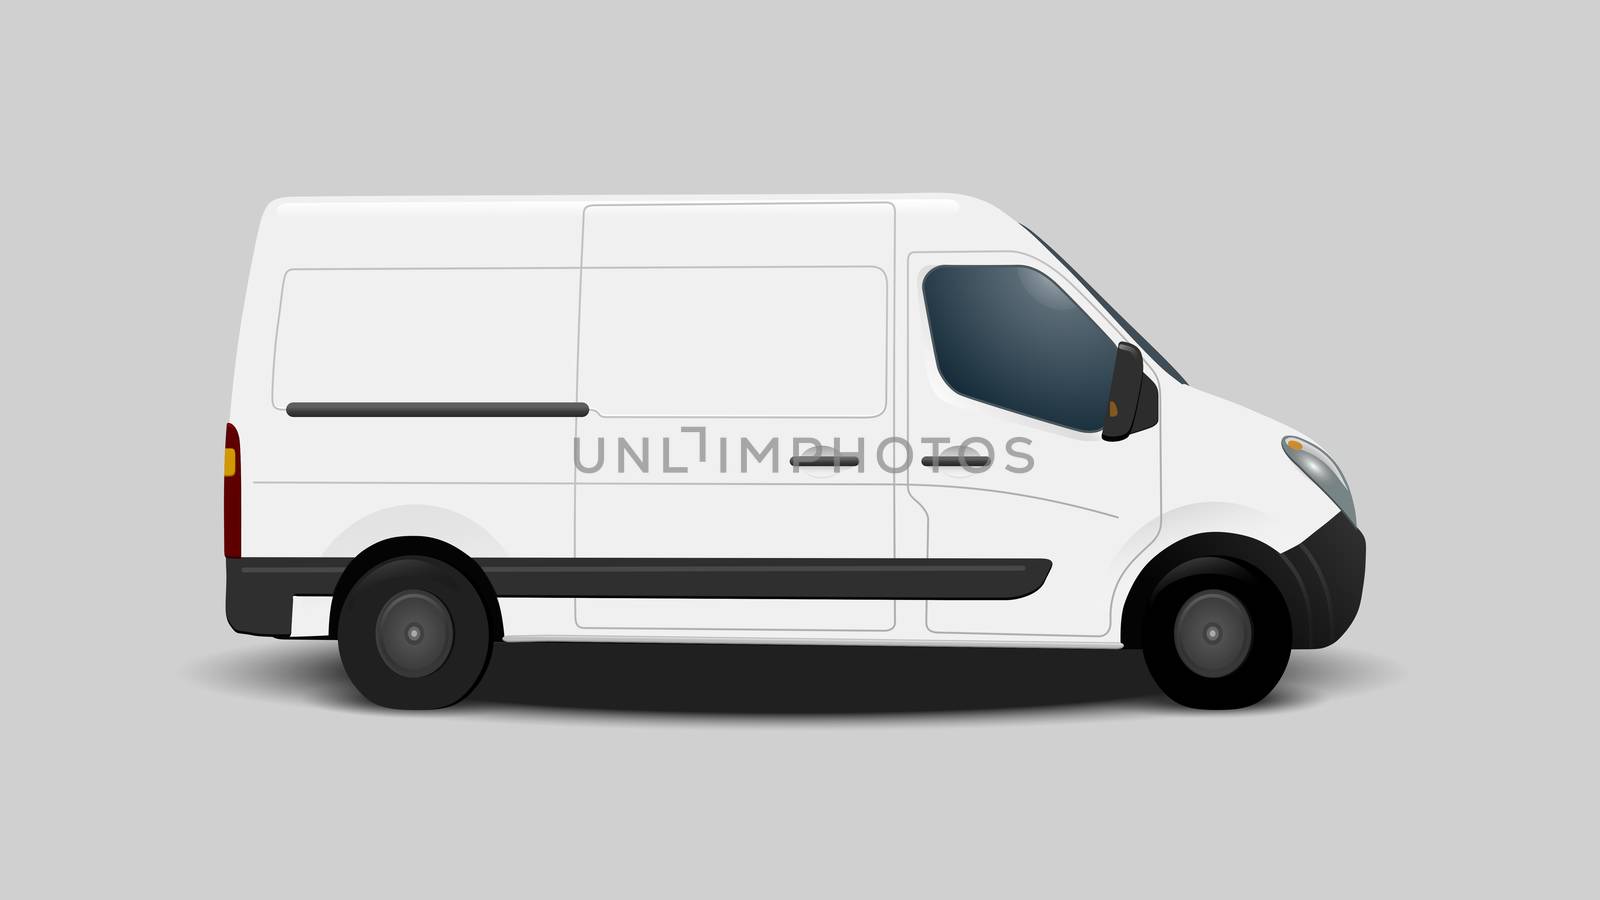 An illustration of a typical white transport vehicle